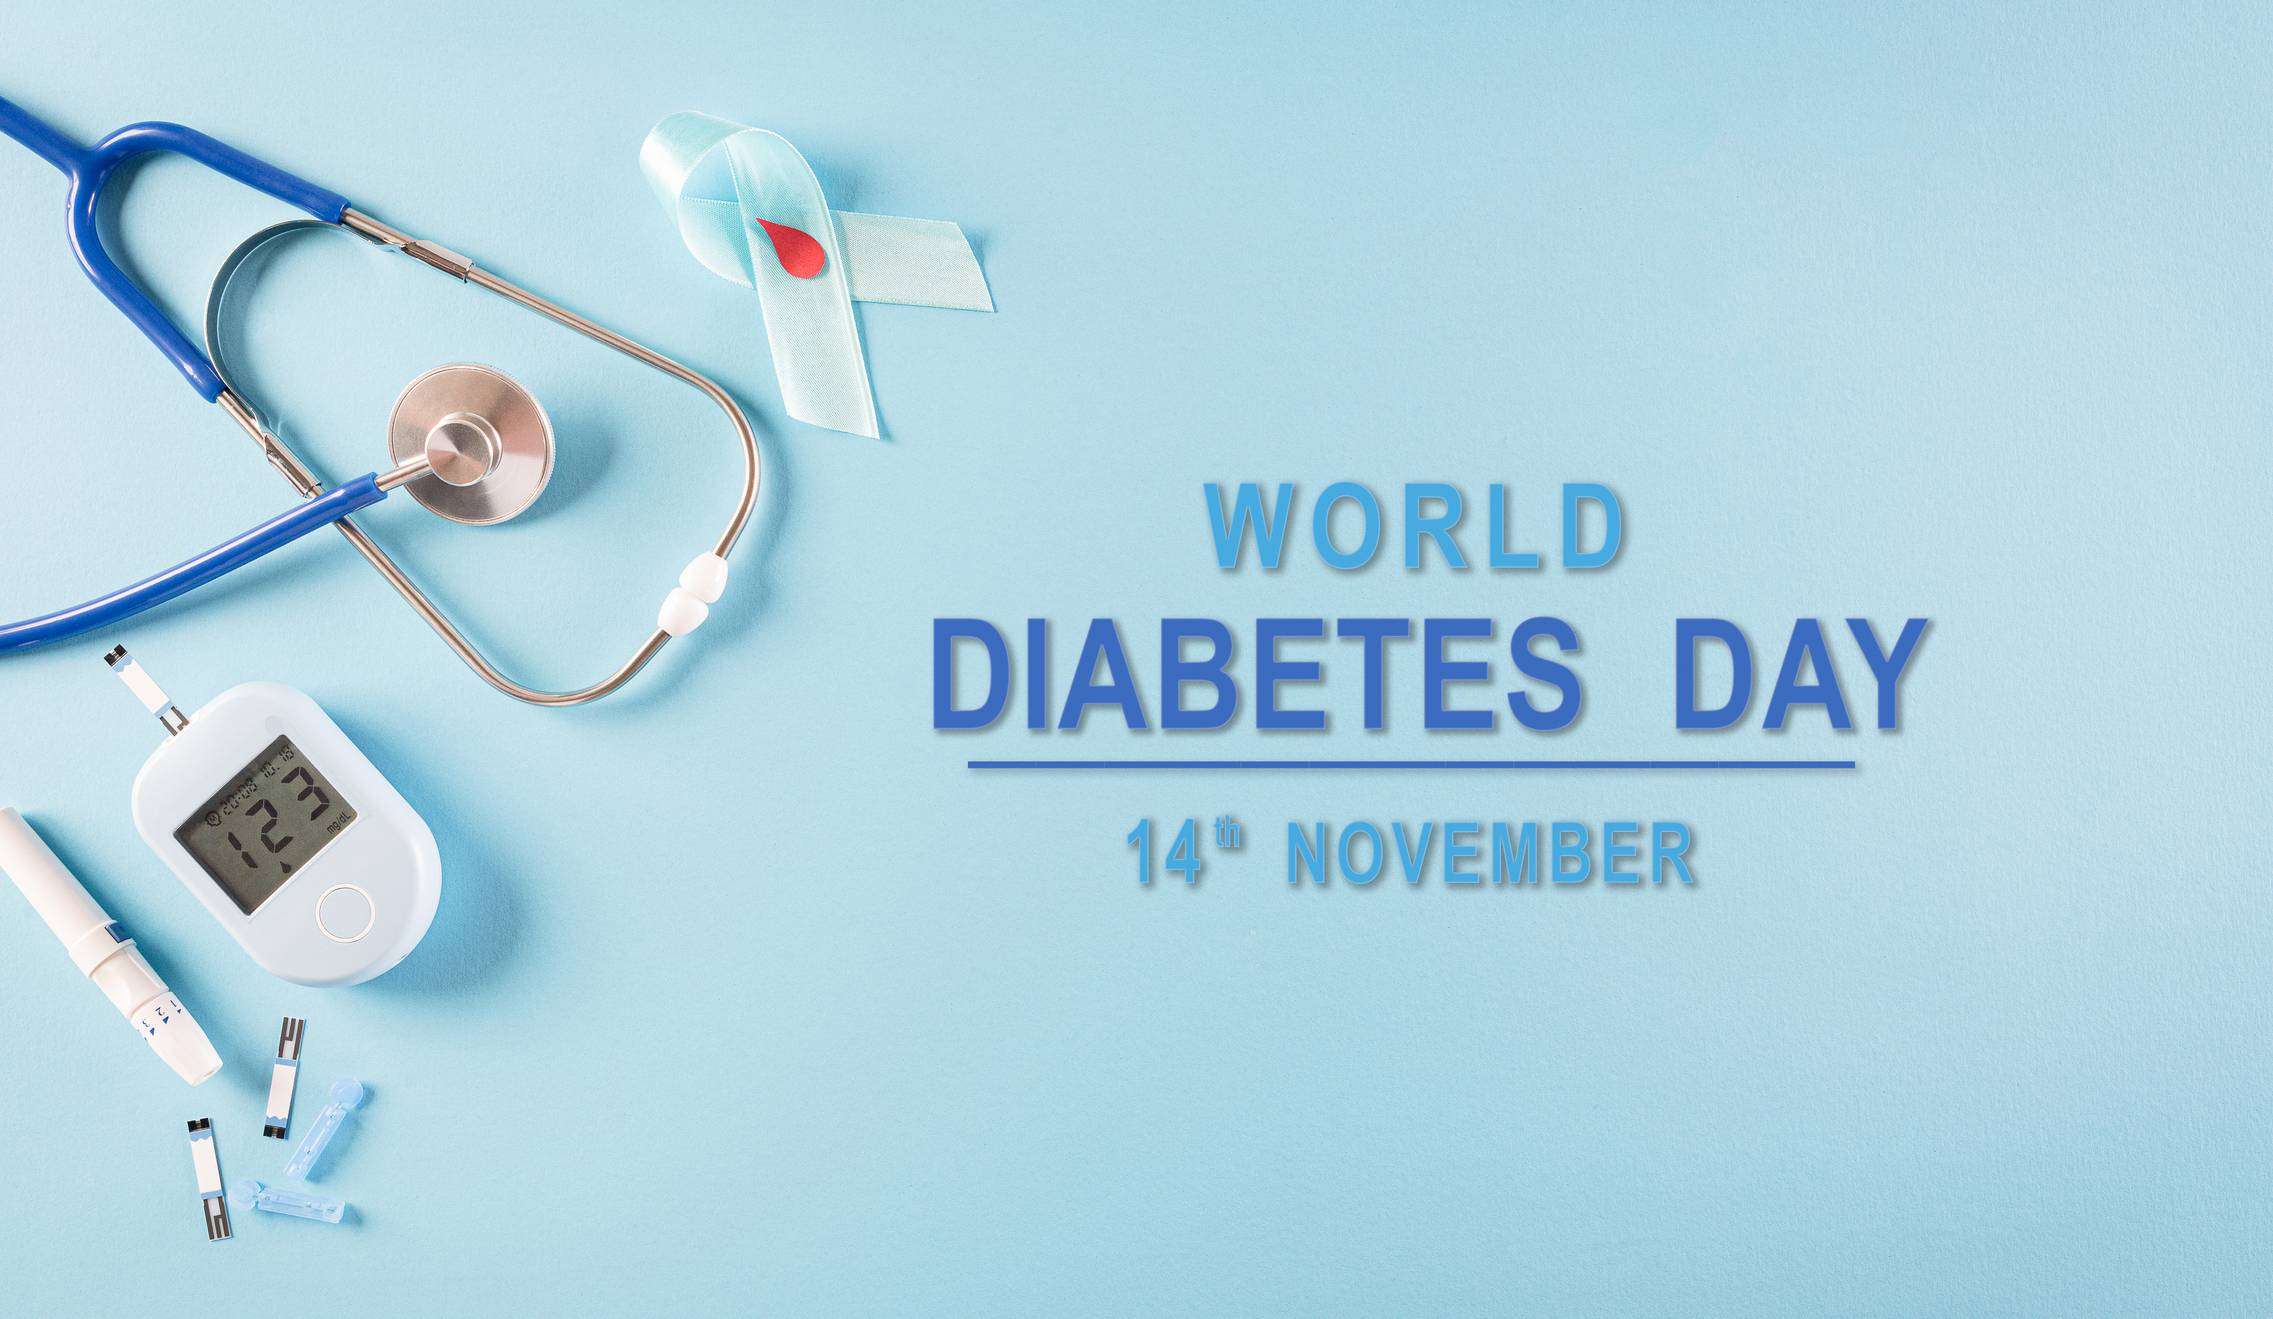 The Commemoration of World Diabetes Day by Leading Medtech Companies